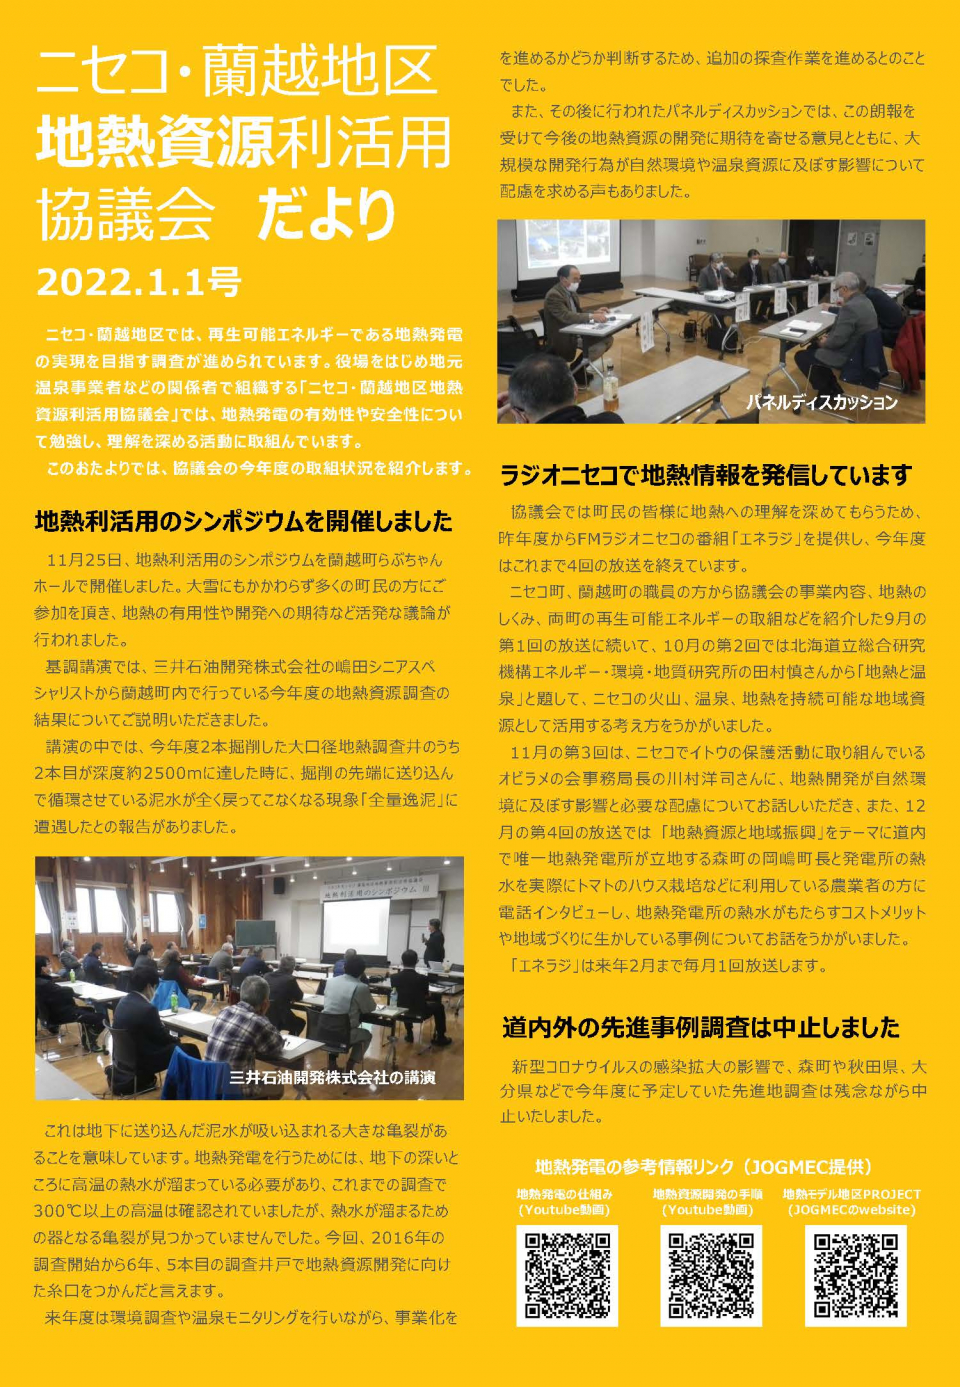 News from Niseko / Rankoshi District Geothermal Resource Utilization Council (No. 2022.1.1)